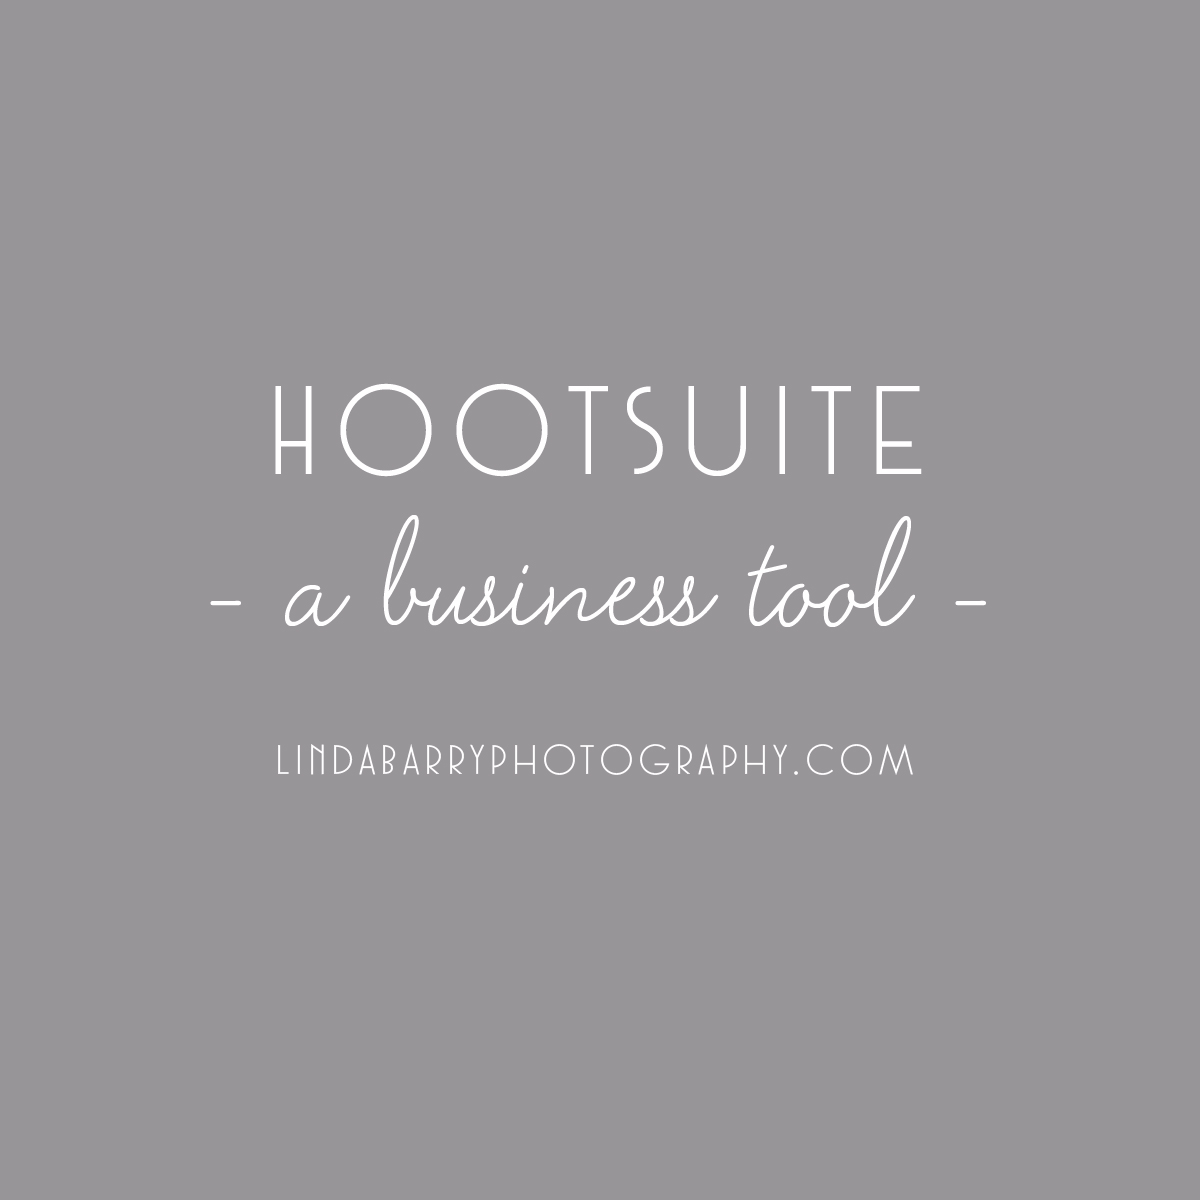 Hootsuite quick start guide by Linda Barry Photography